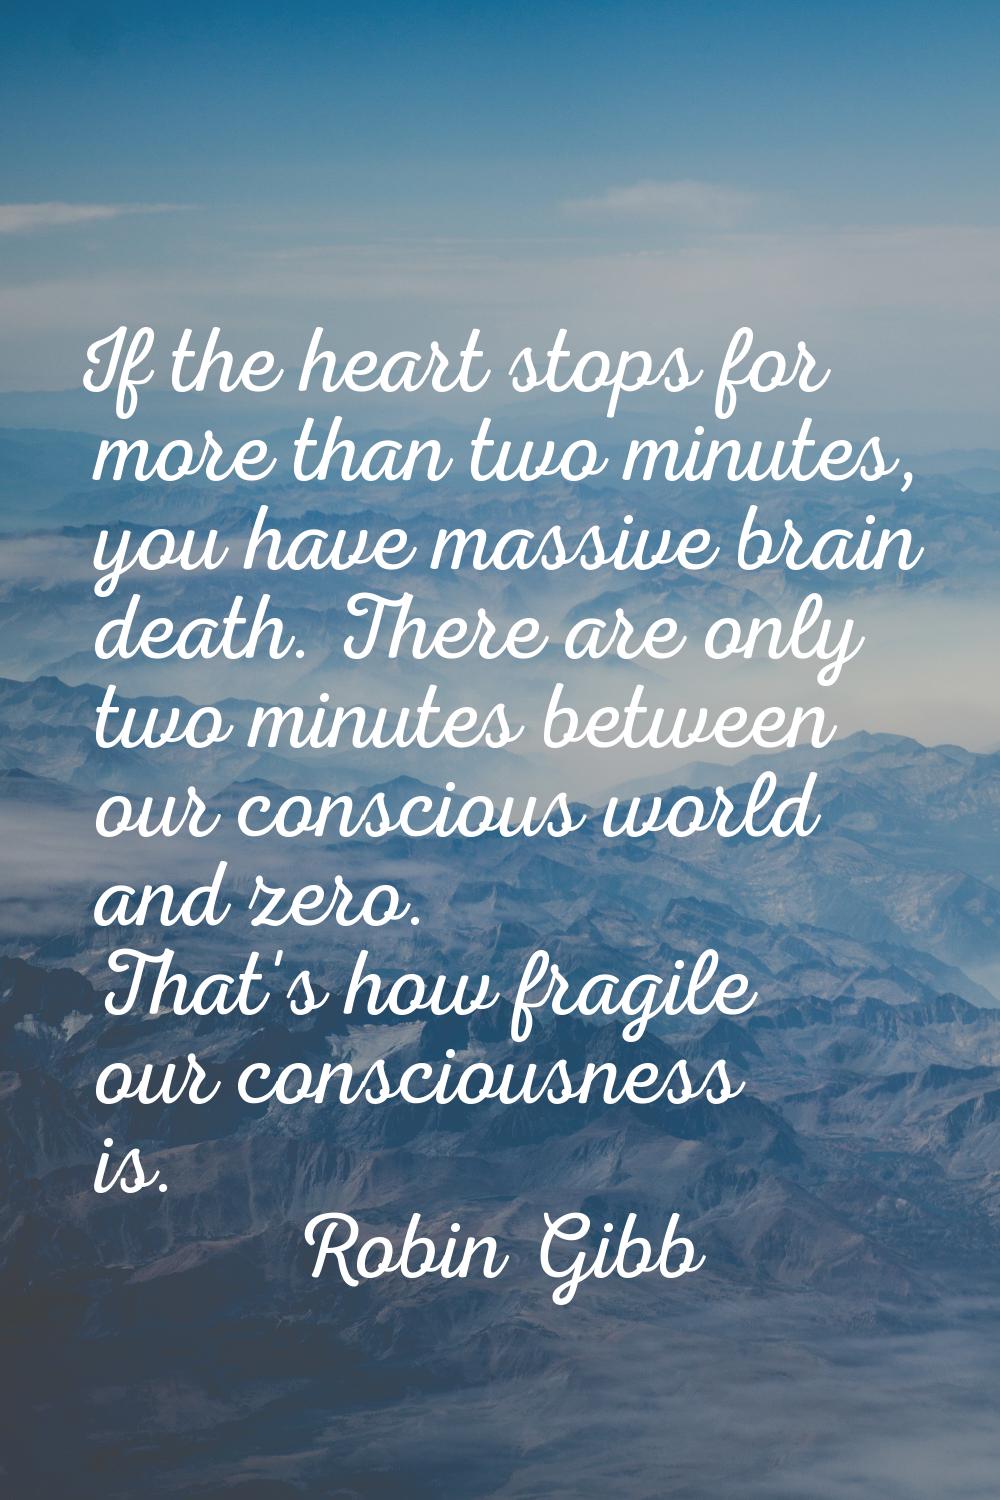 If the heart stops for more than two minutes, you have massive brain death. There are only two minu